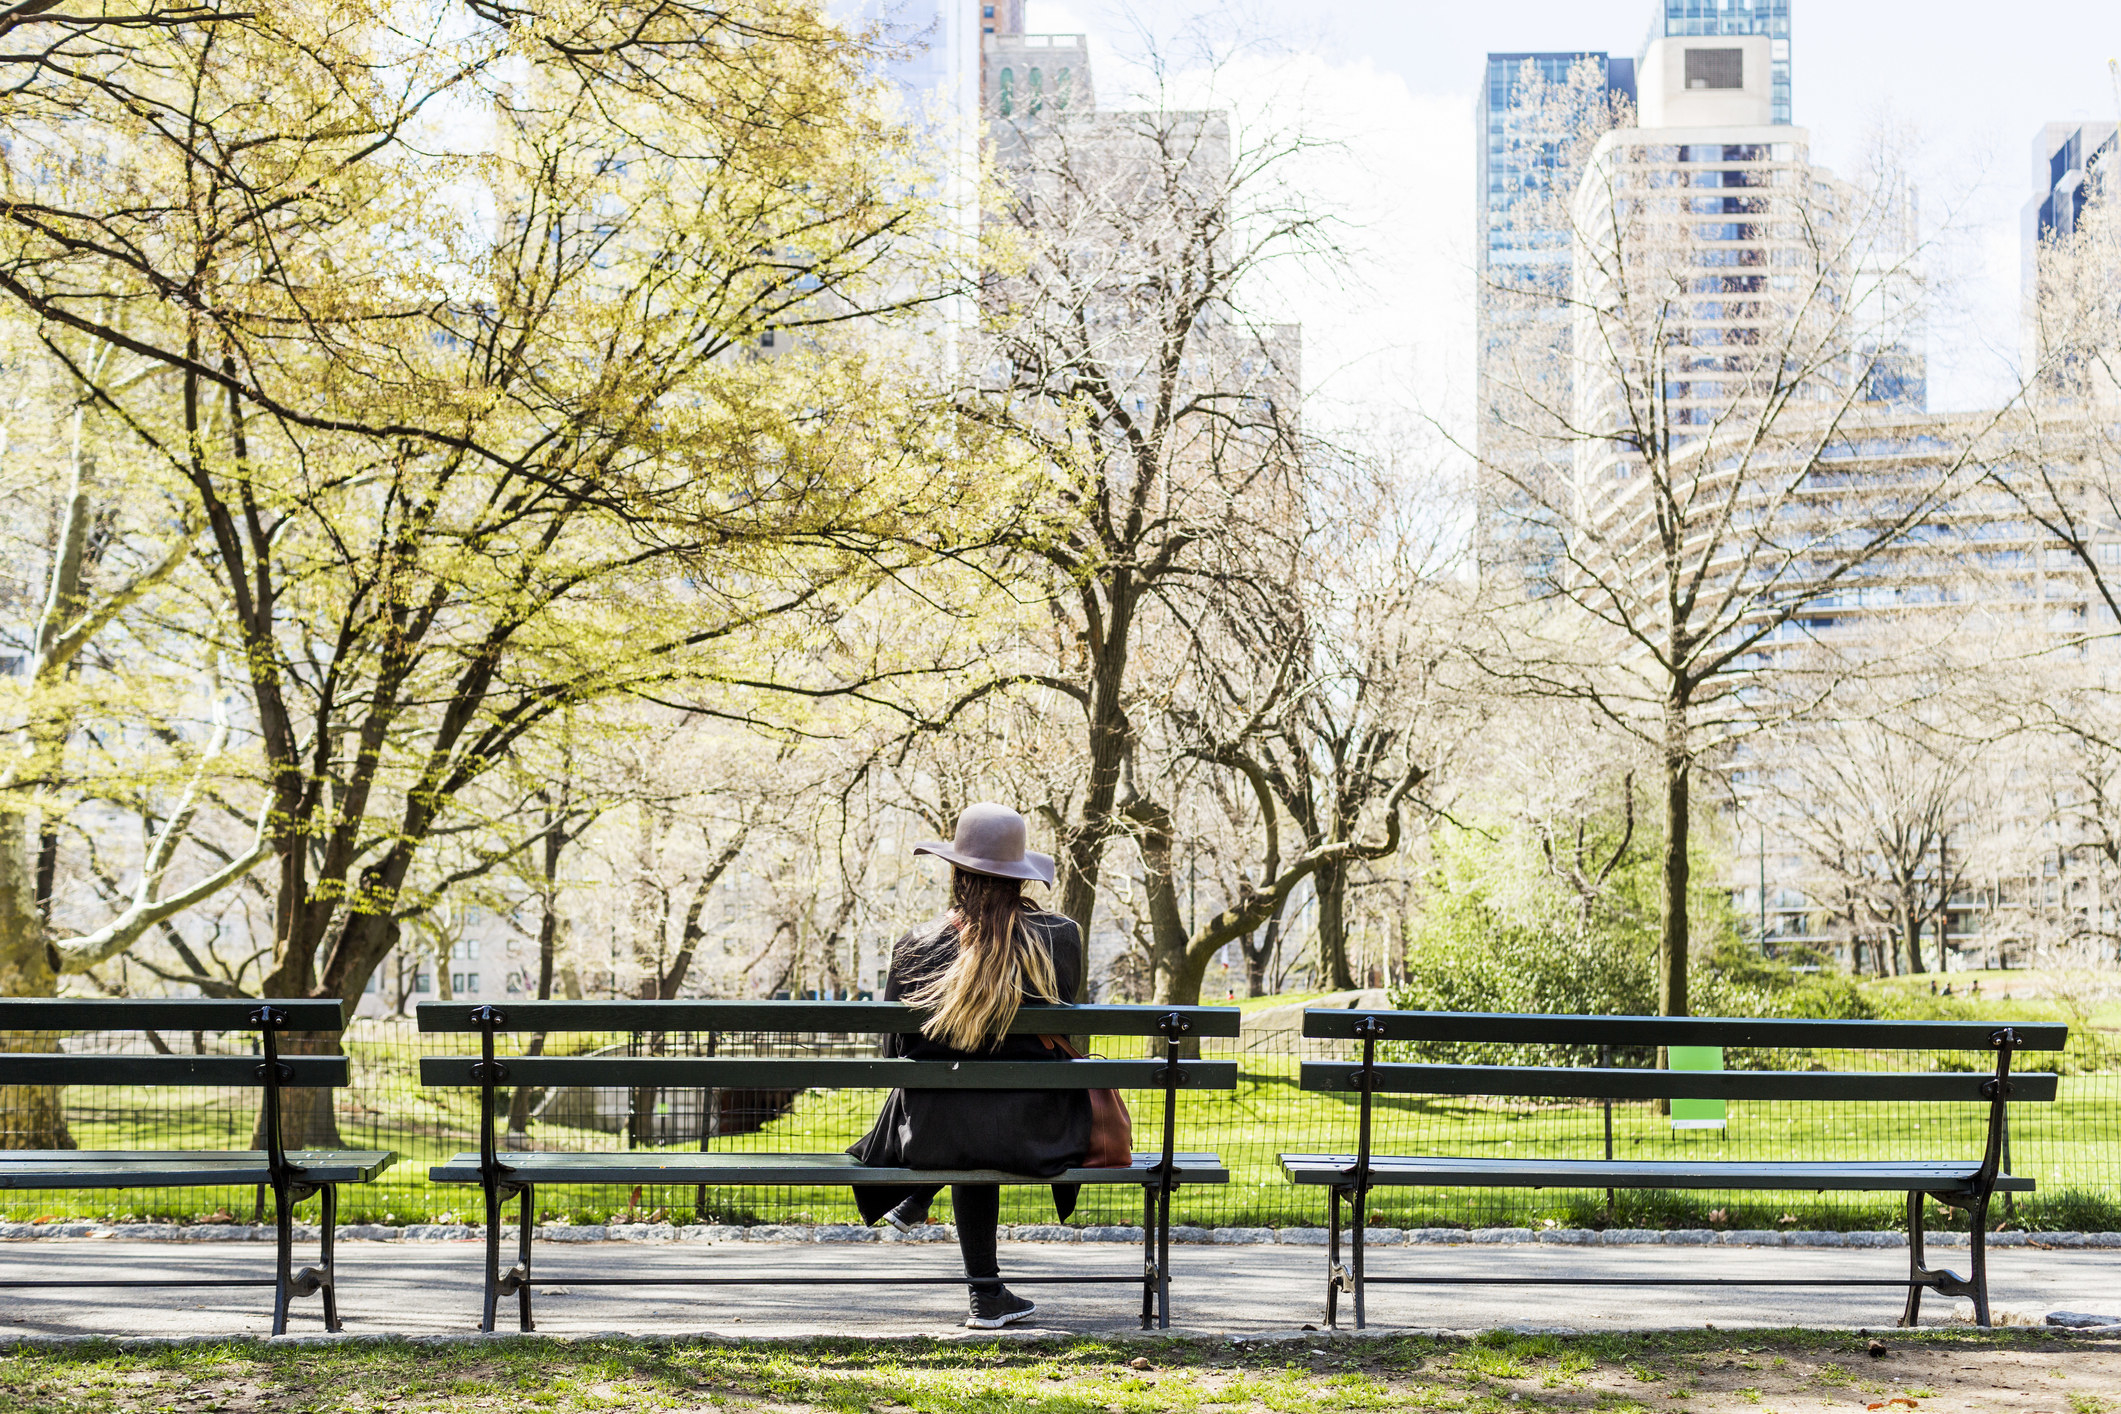 A woman sitting on a bench in Central Park.